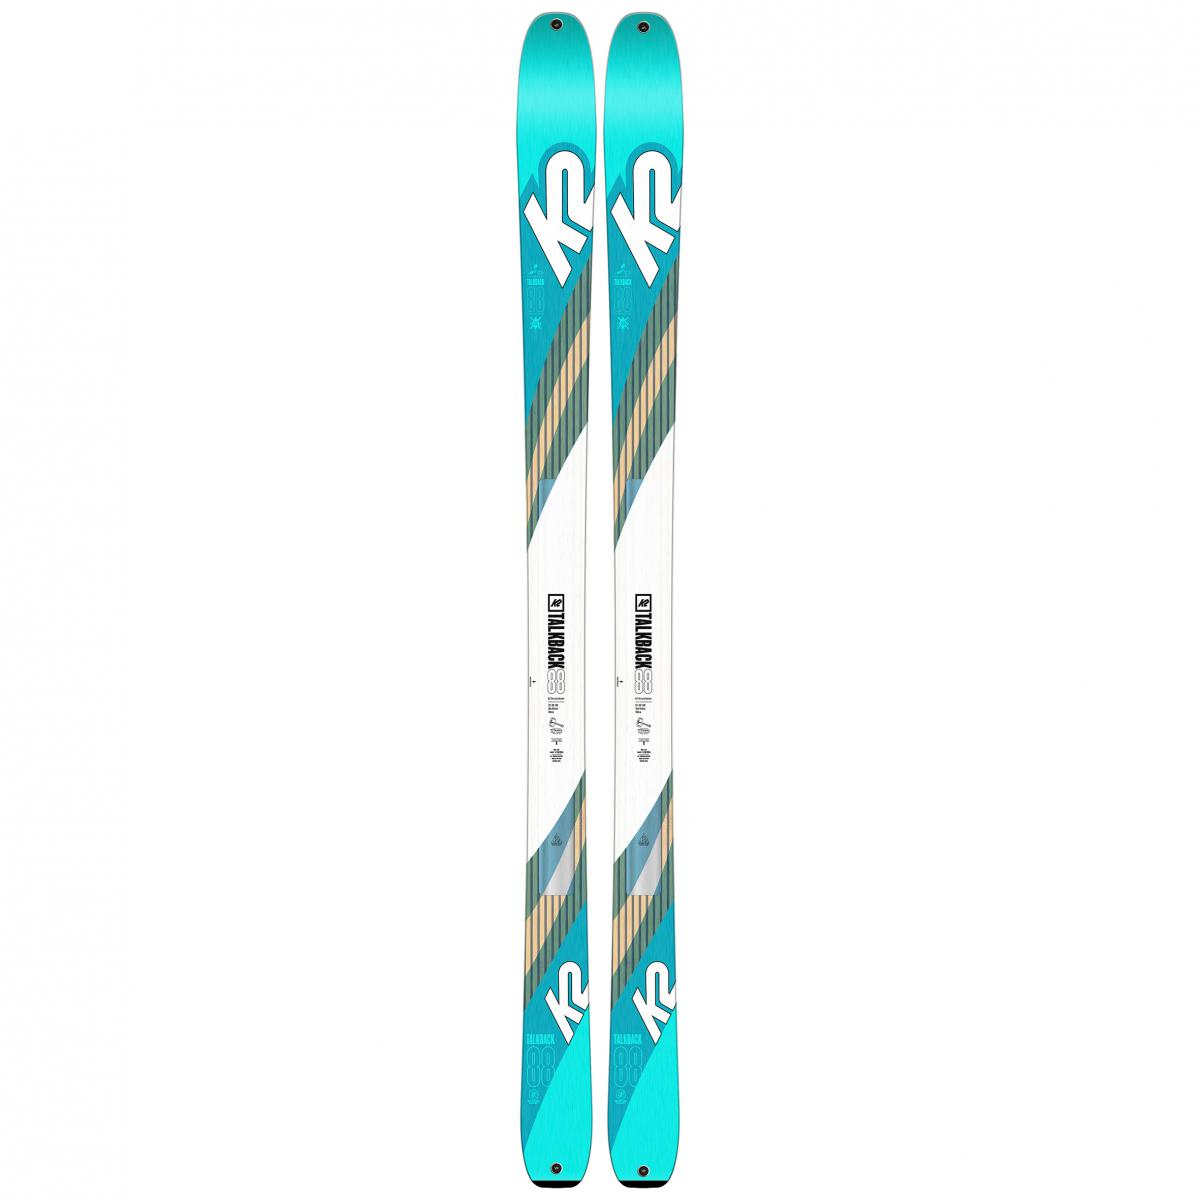 R391 Straps for jump,carving skis